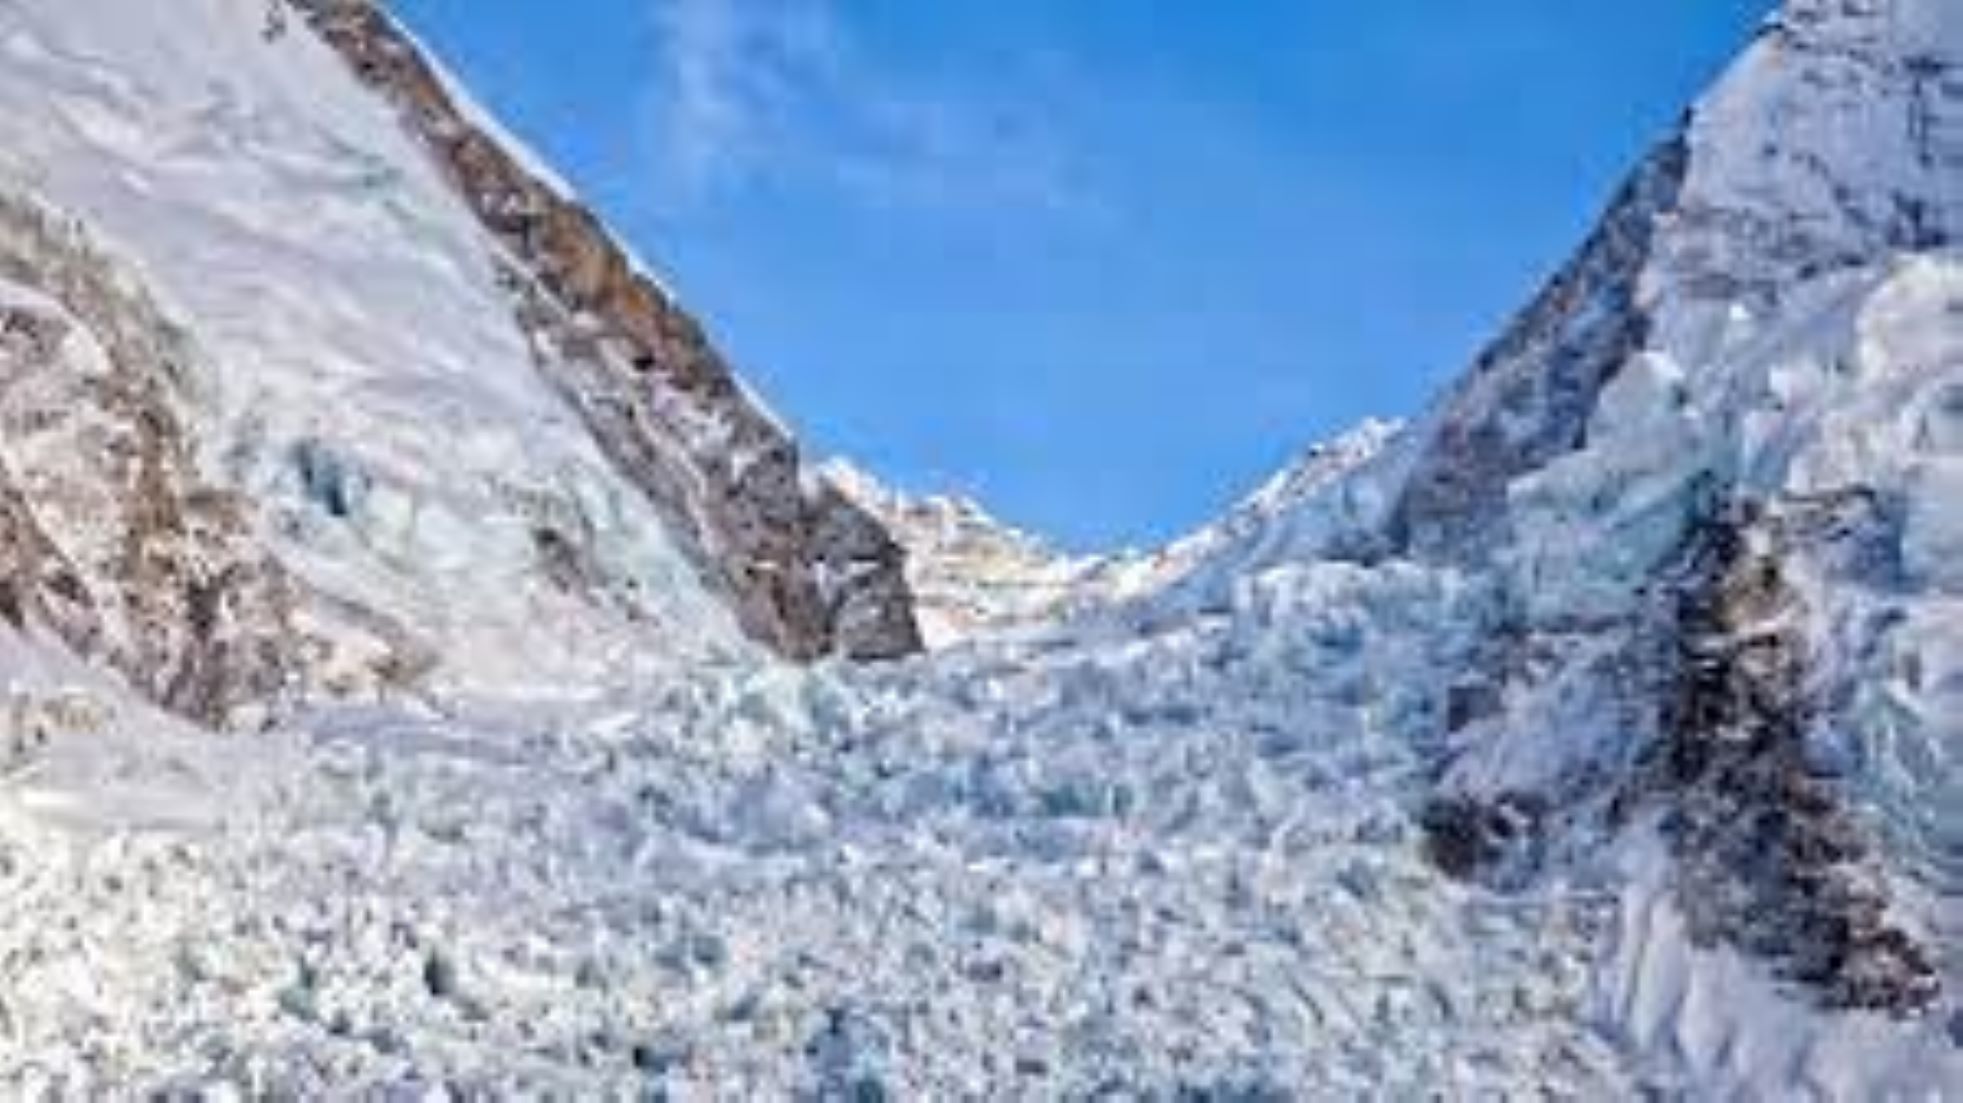 Three Nepali Climbing Guides Missing In Avalanche